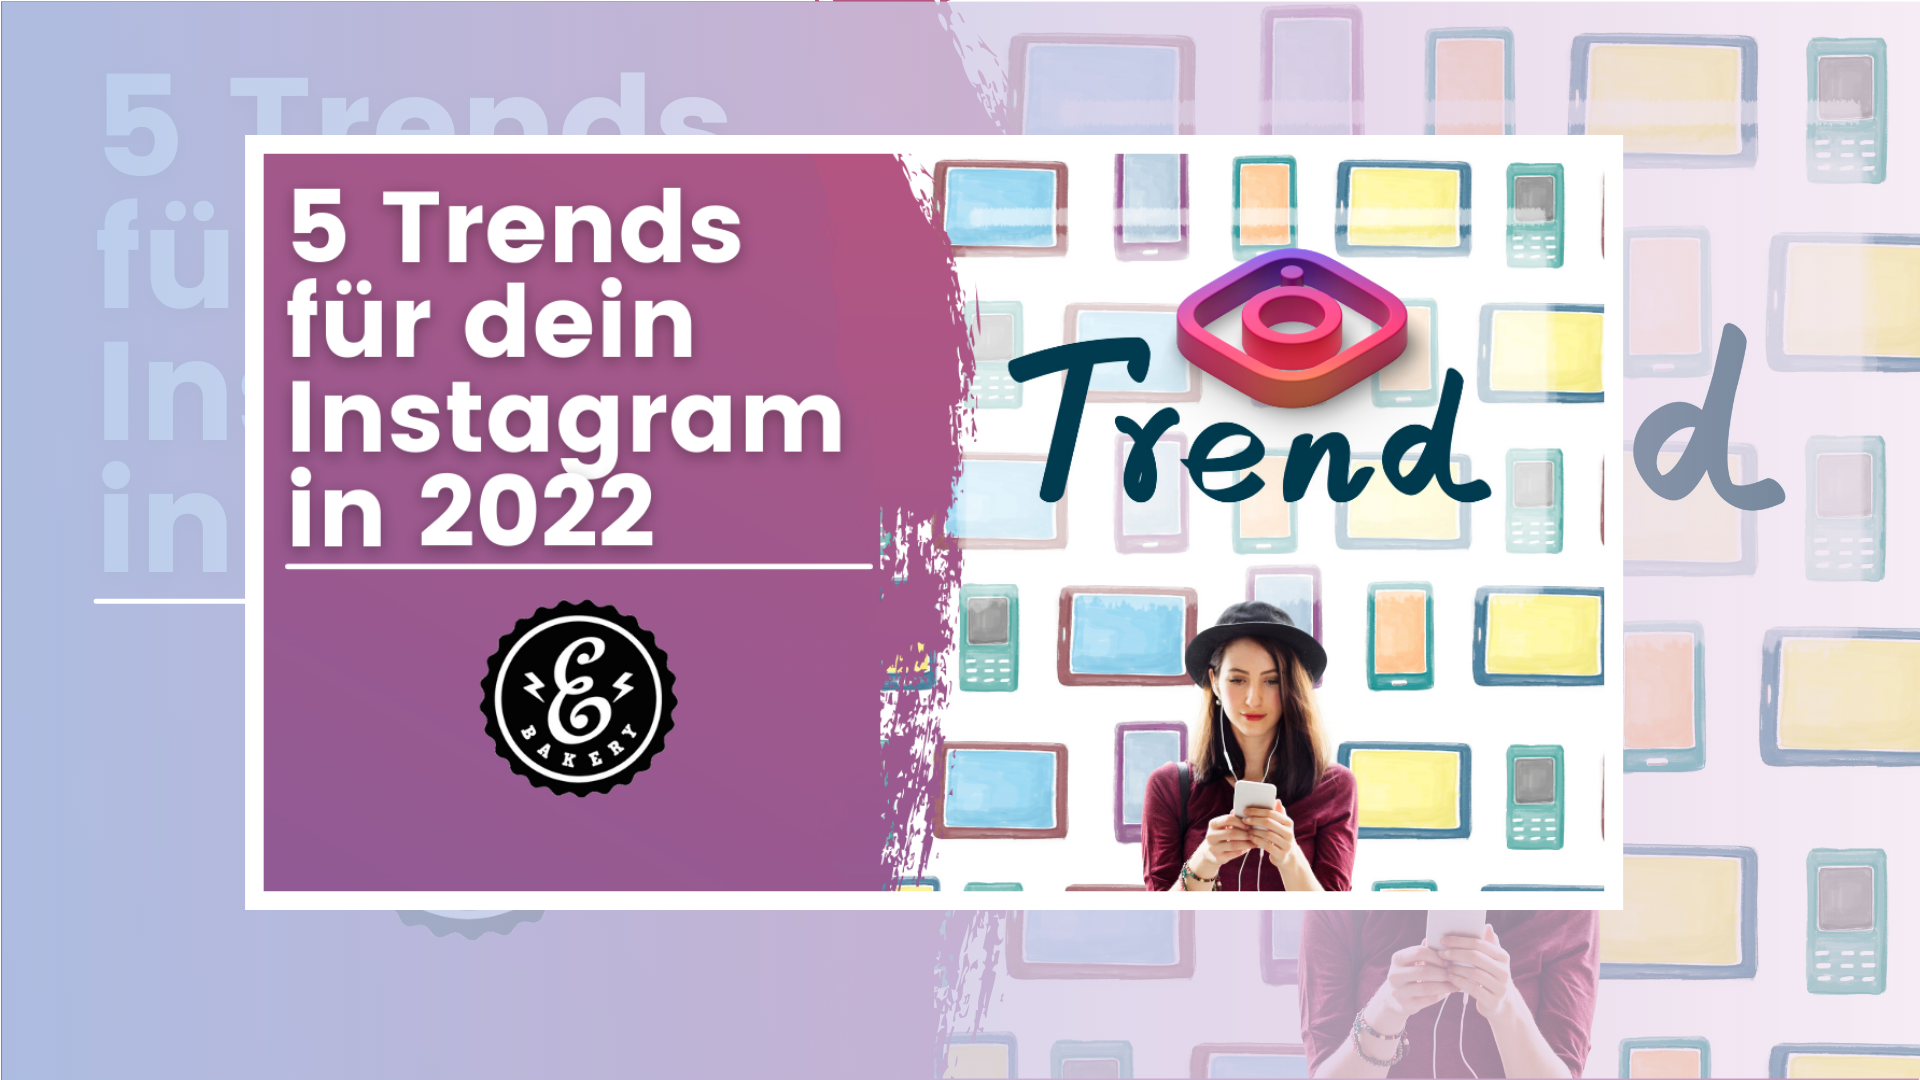 5 Instagram trends for 2022 -Trends for a successful Instagram strategy